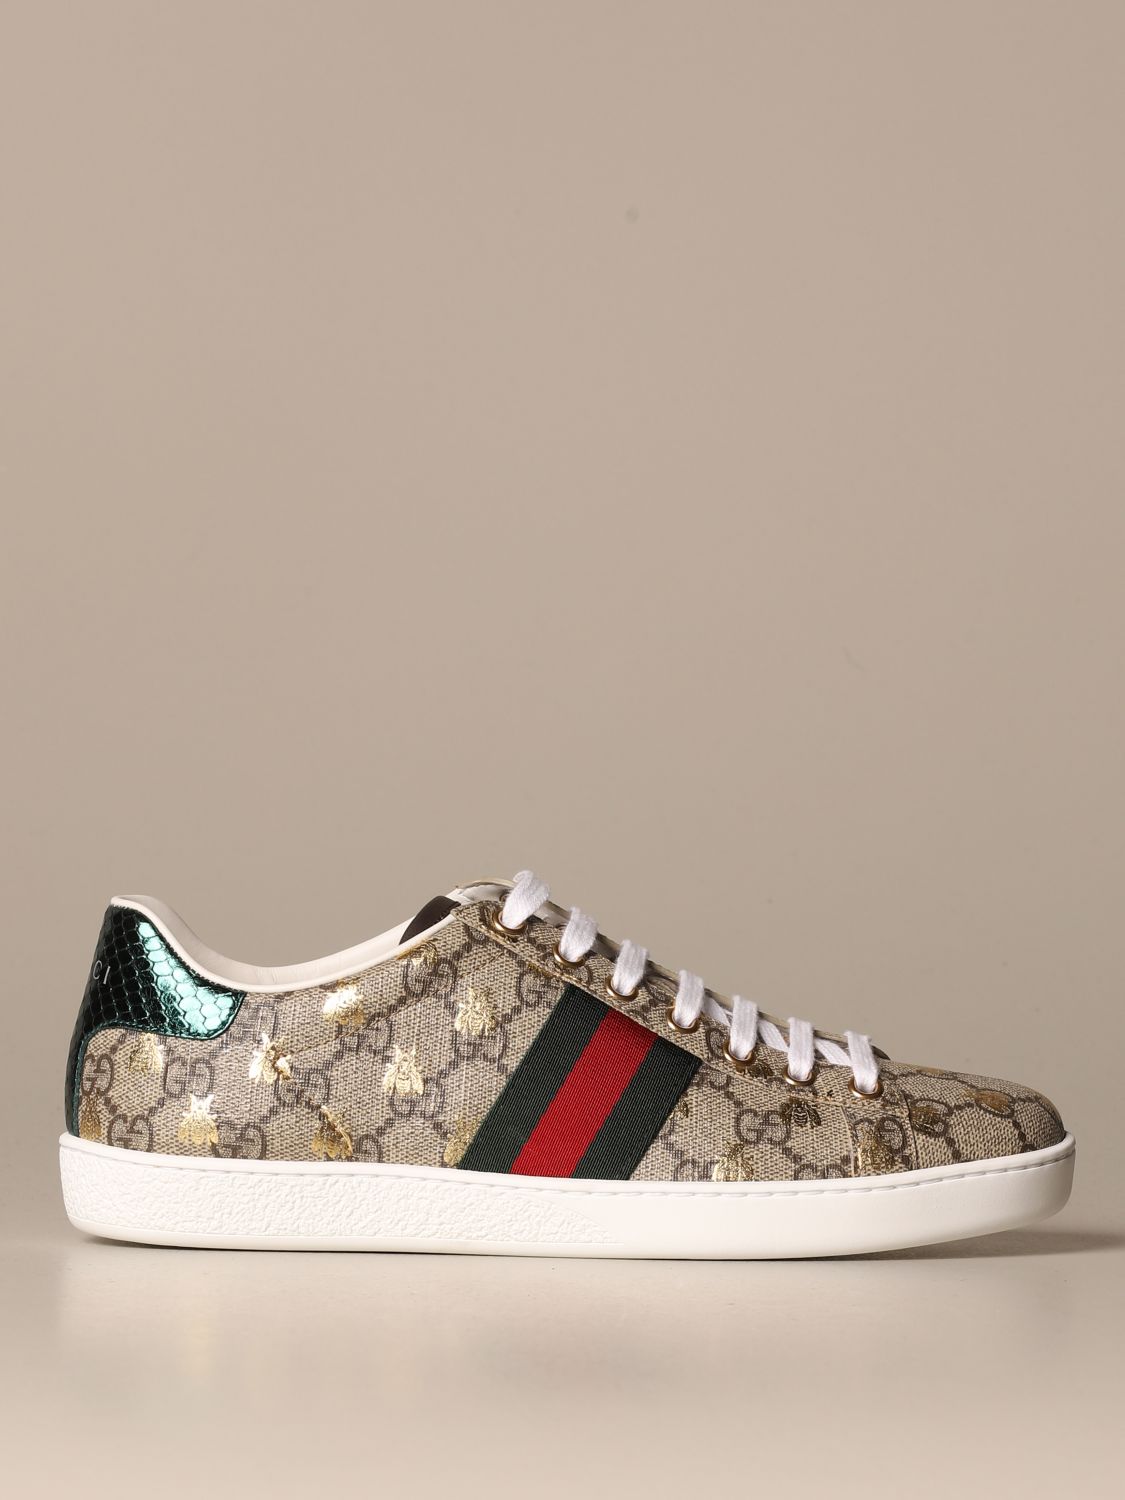 GUCCI: Ace sneakers with GG Supreme print and laminated bees - Beige